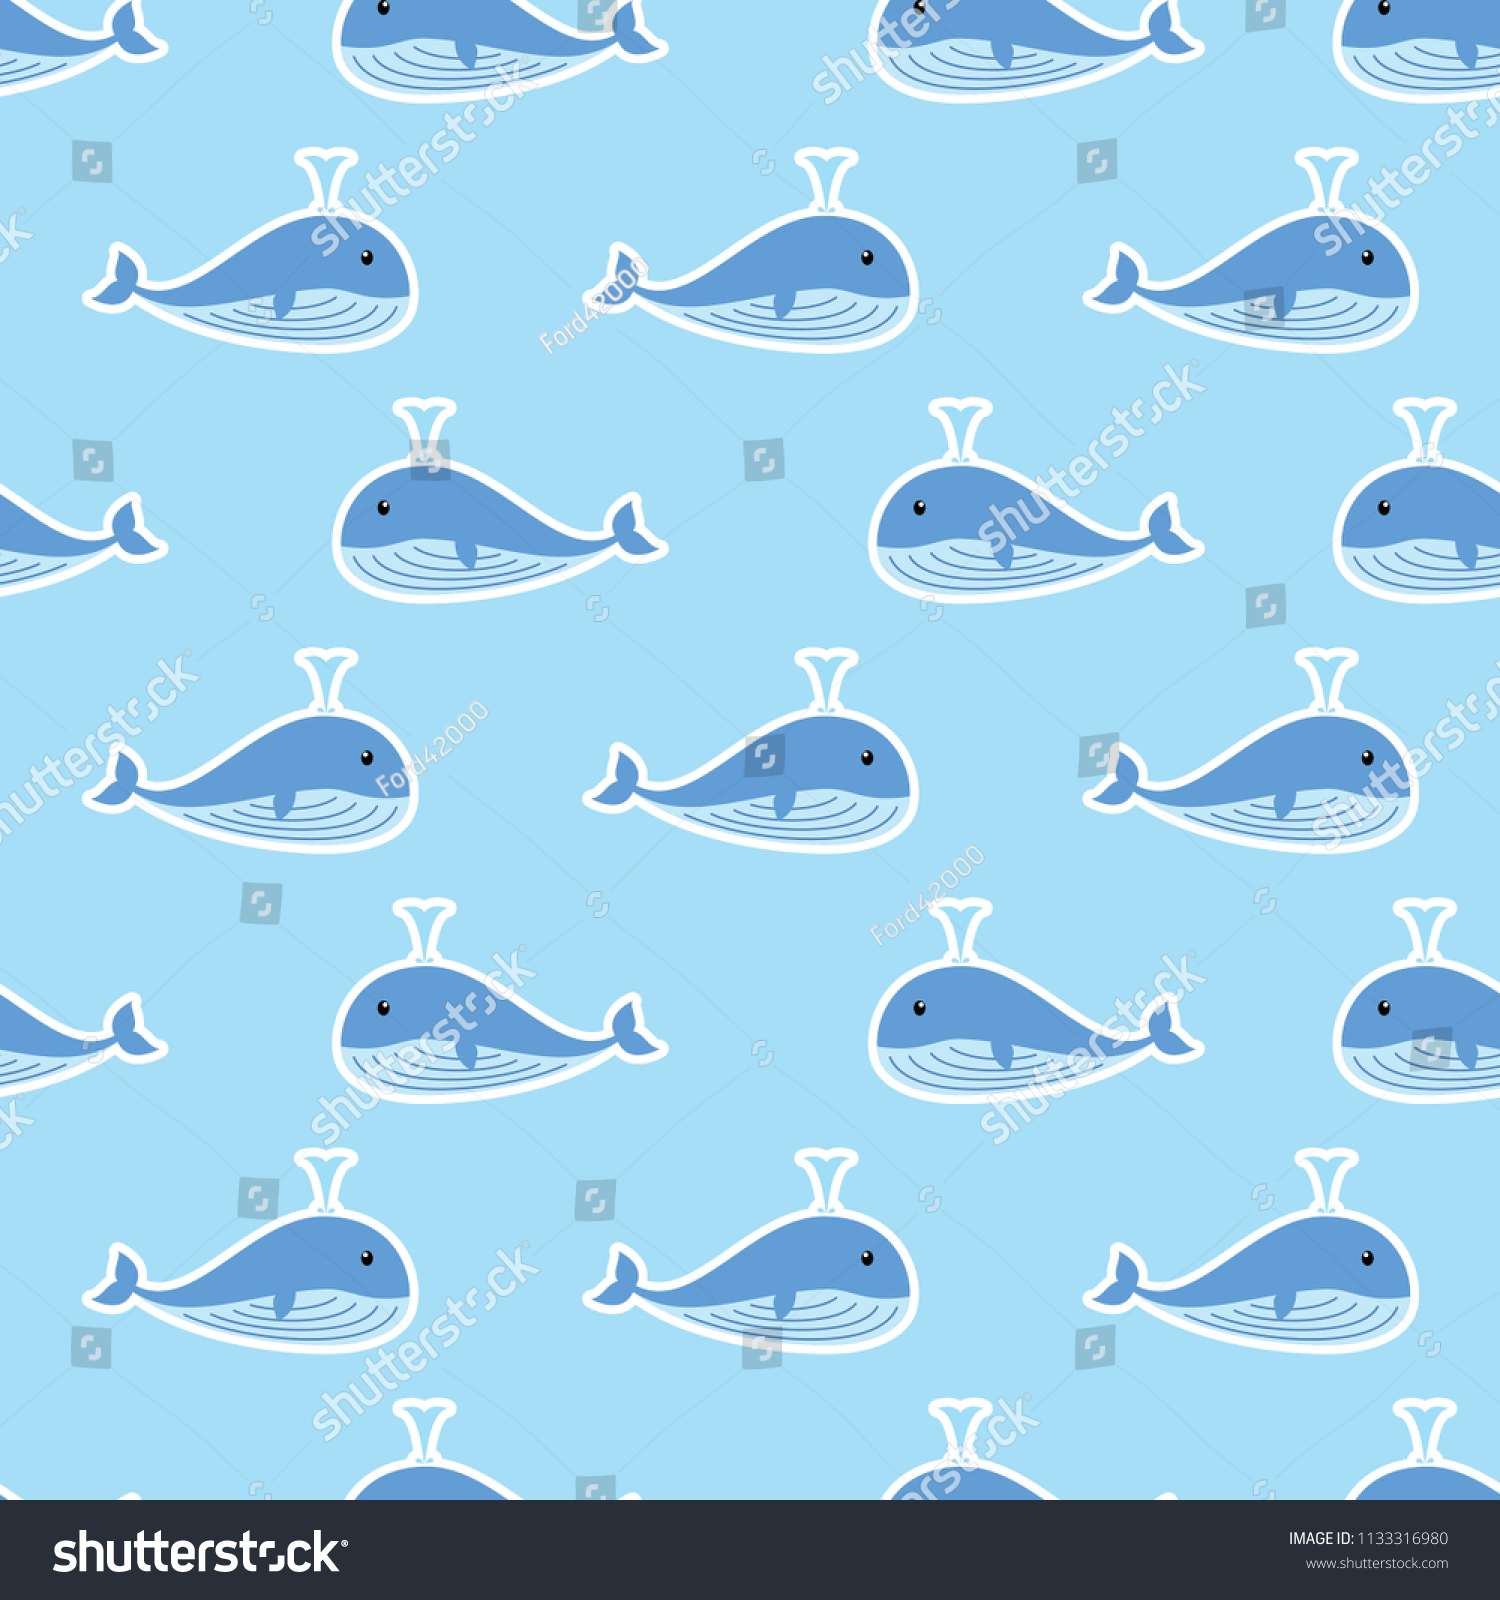 Seamless Cute Whale Vector Pattern On Stock Vector Royalty Free